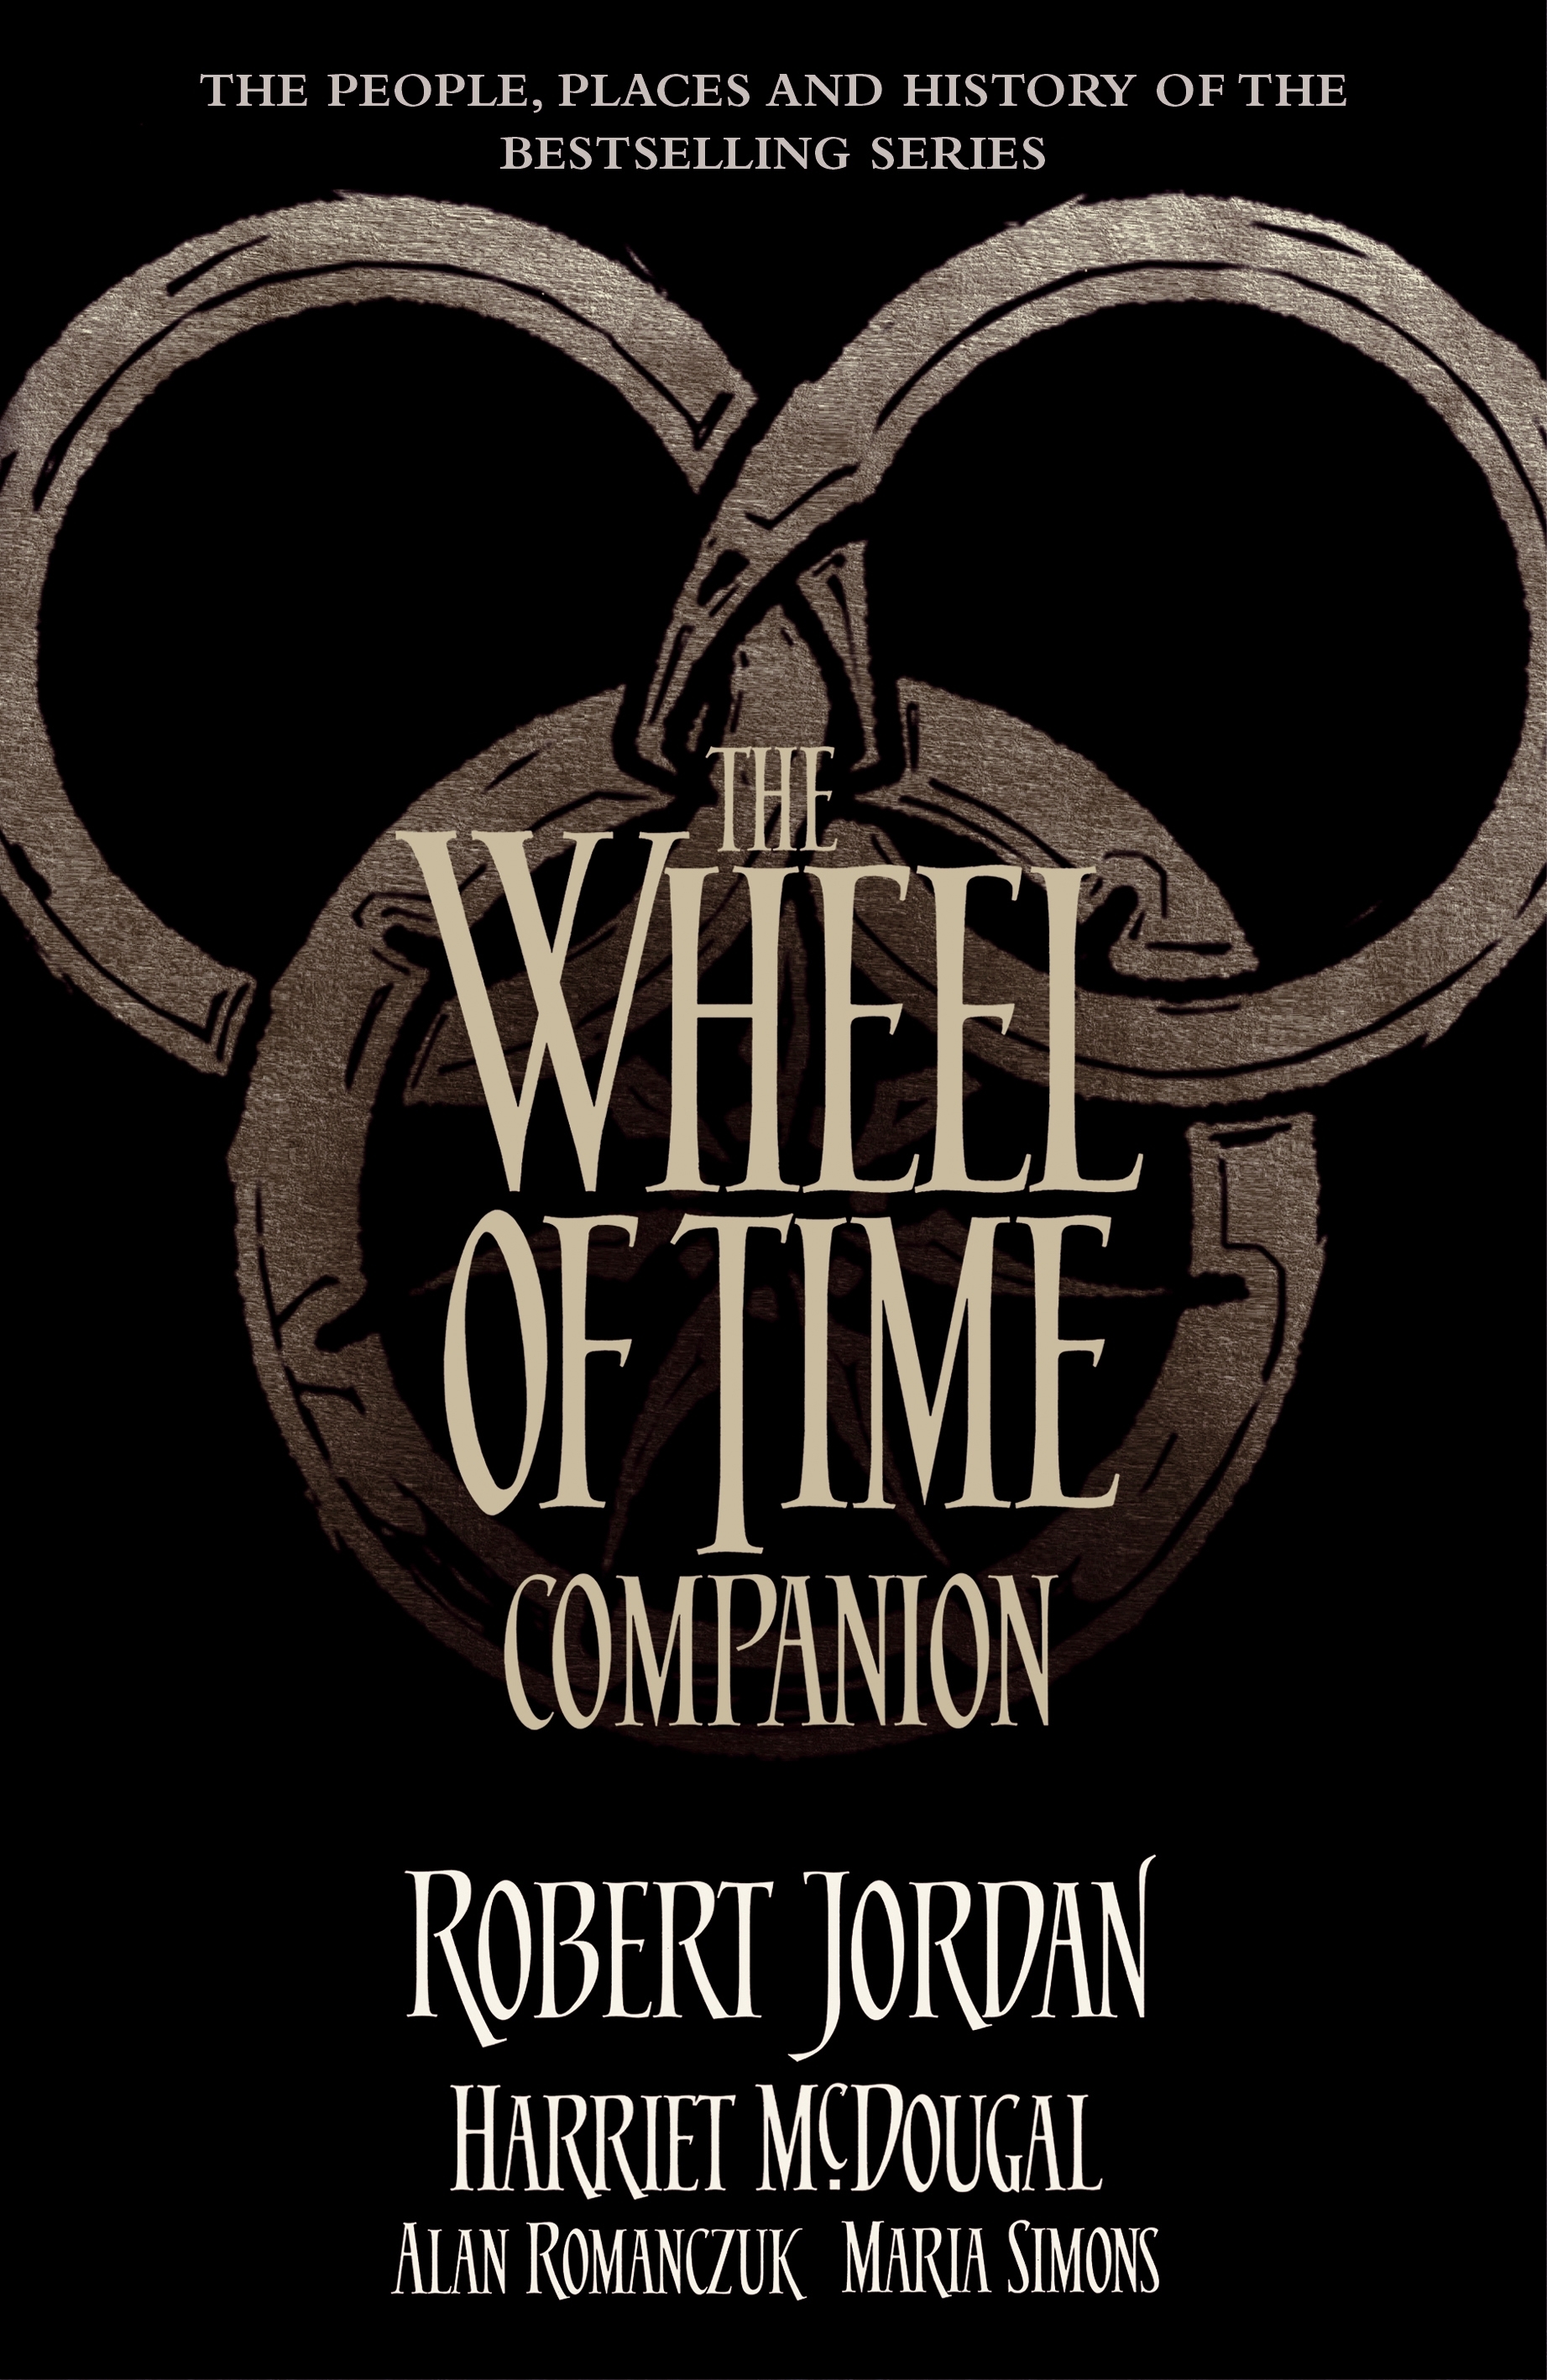 The Wheel of Time book cover.